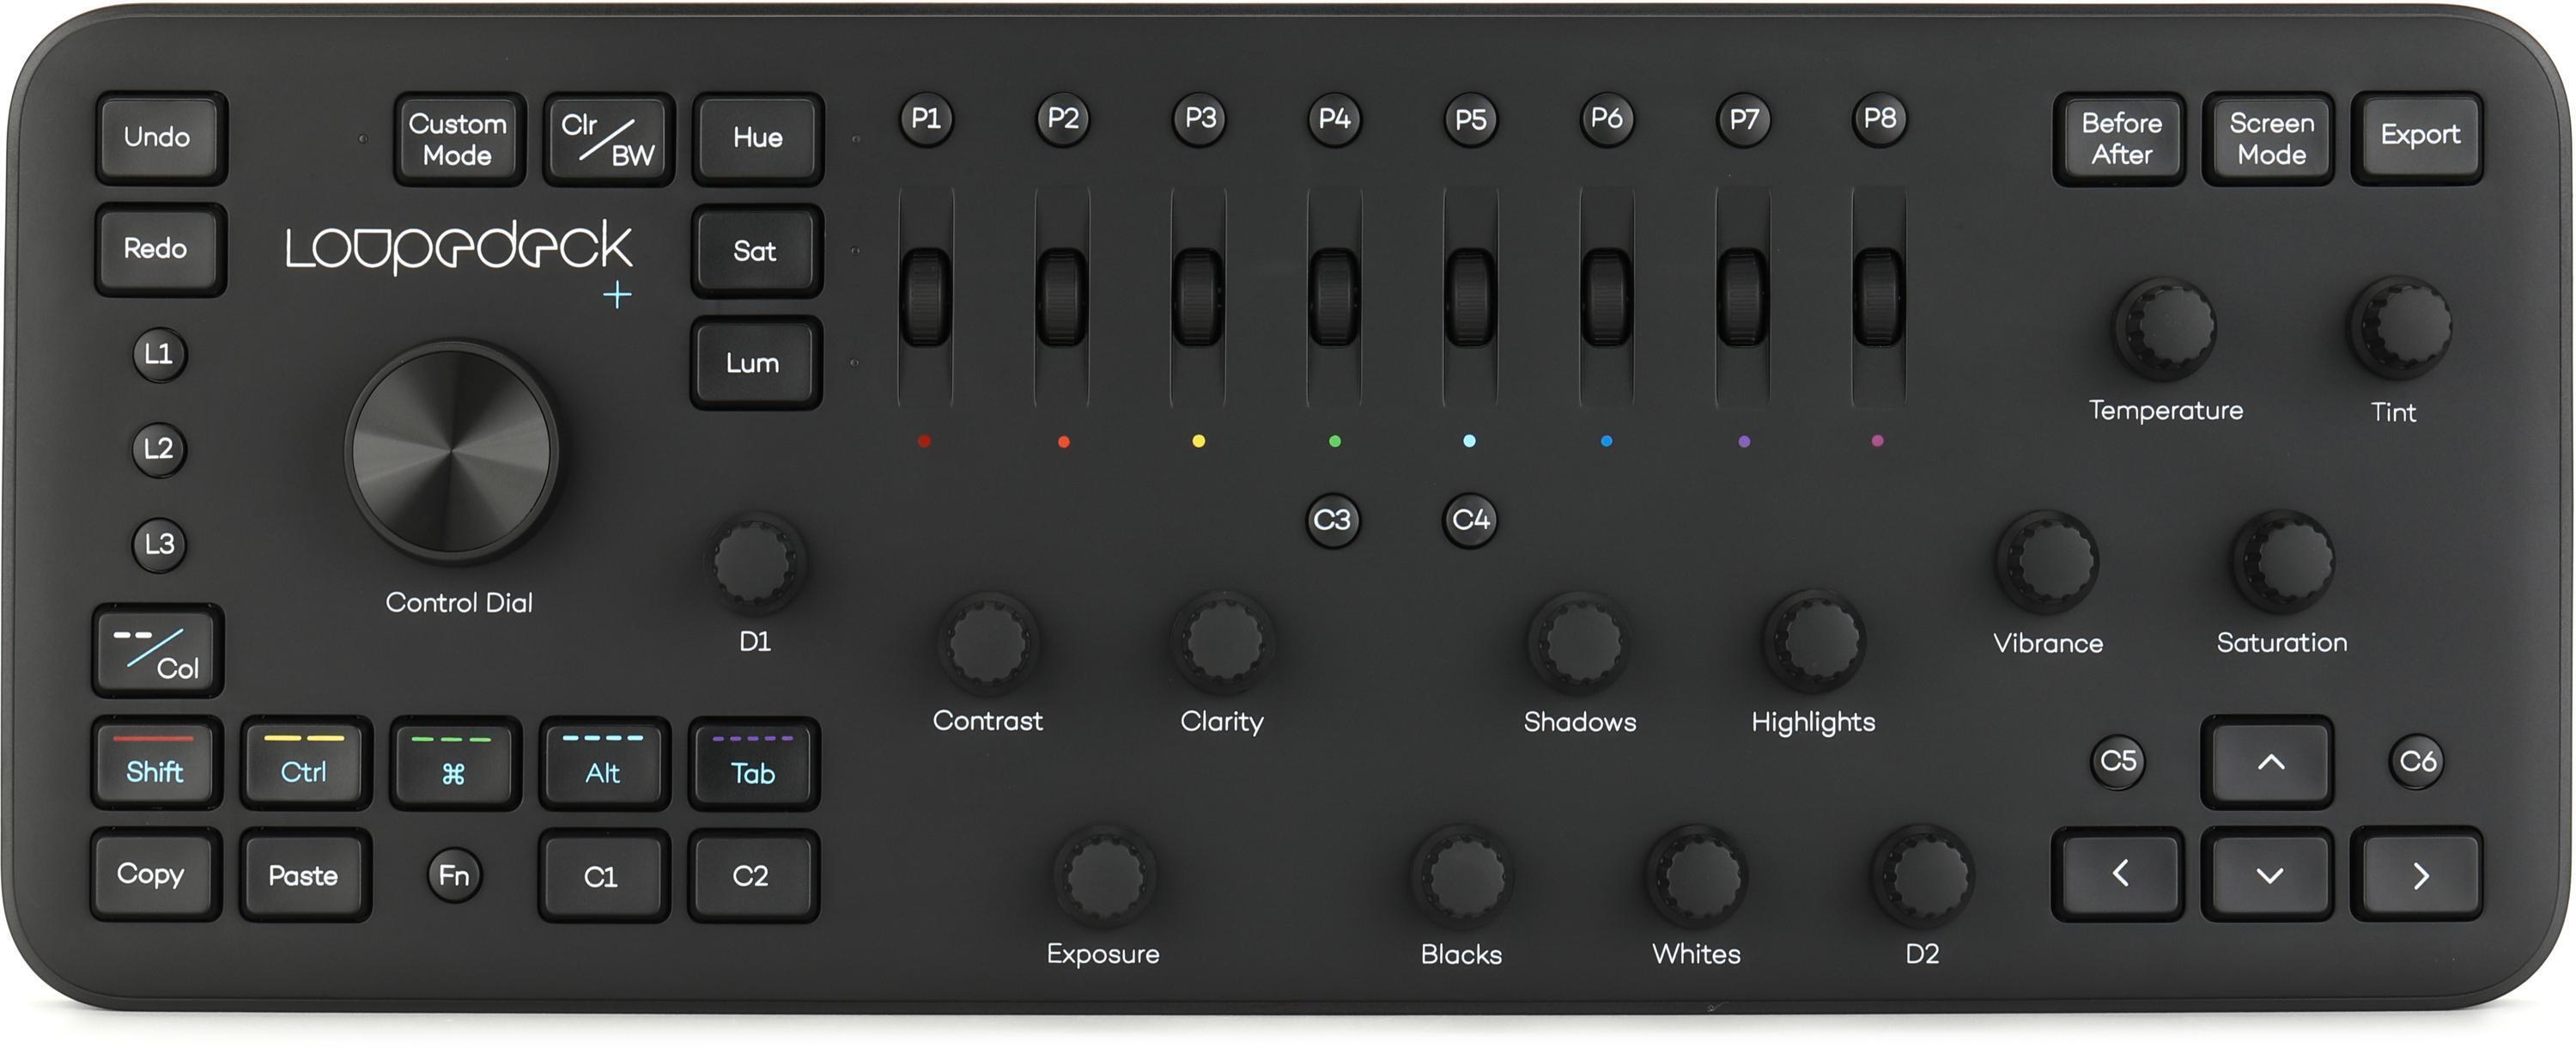 Loupedeck Creative Tool - Professional Custom Editing Console for Photo,  Video, Music and Design